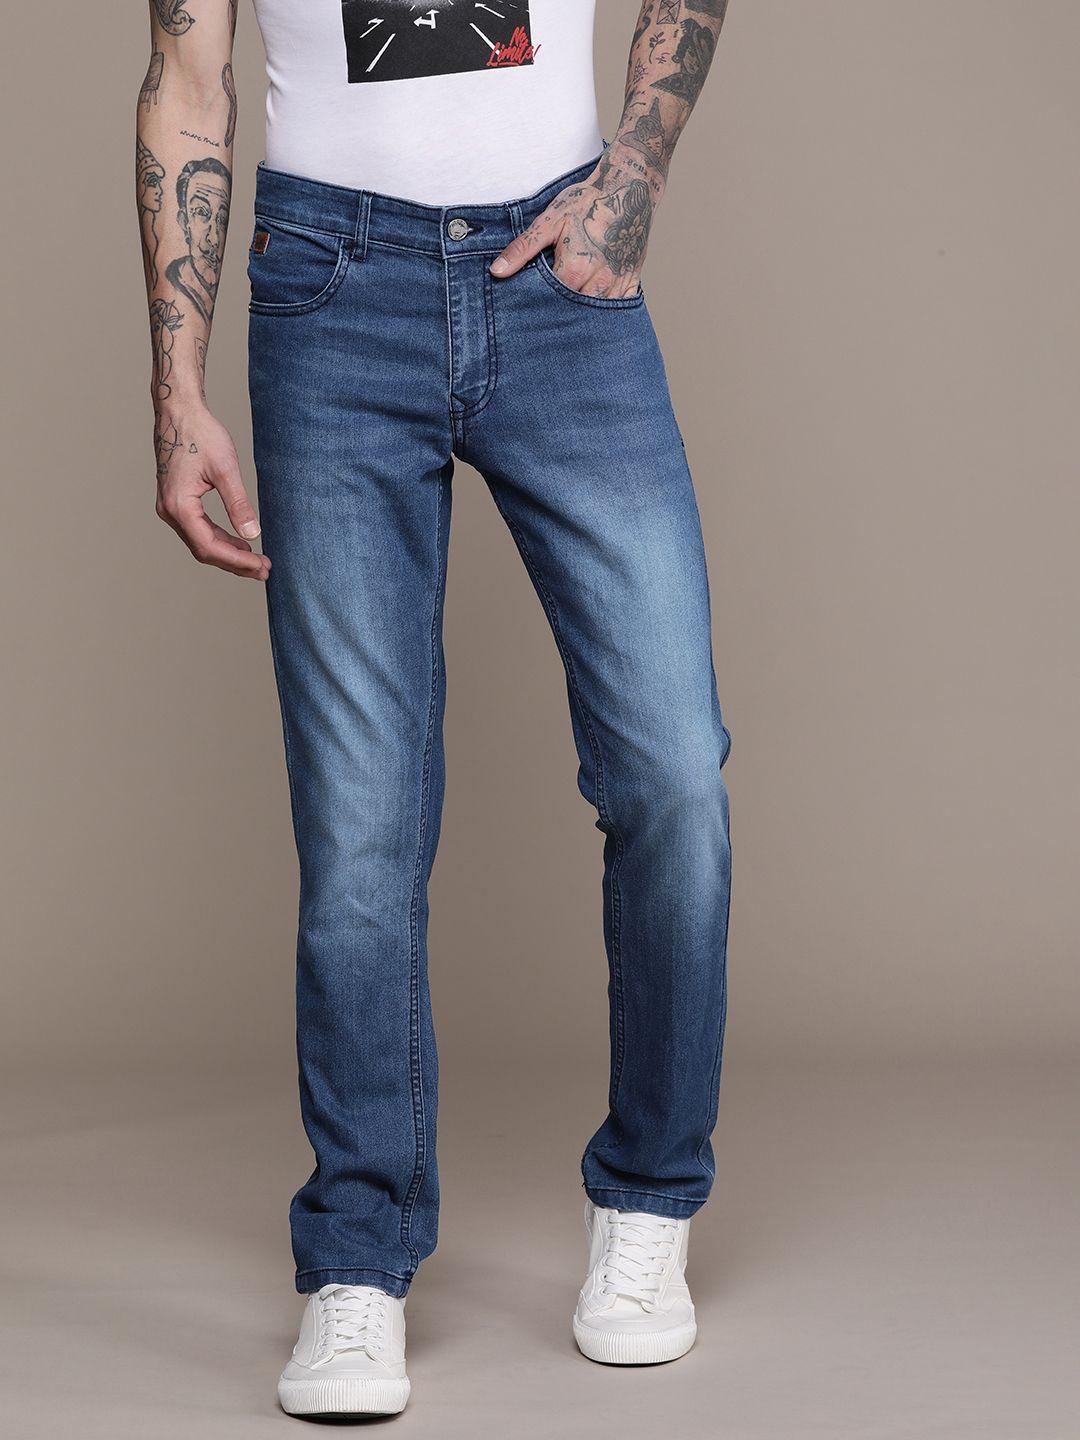 WROGN Men Light Fade Stretchable Jeans